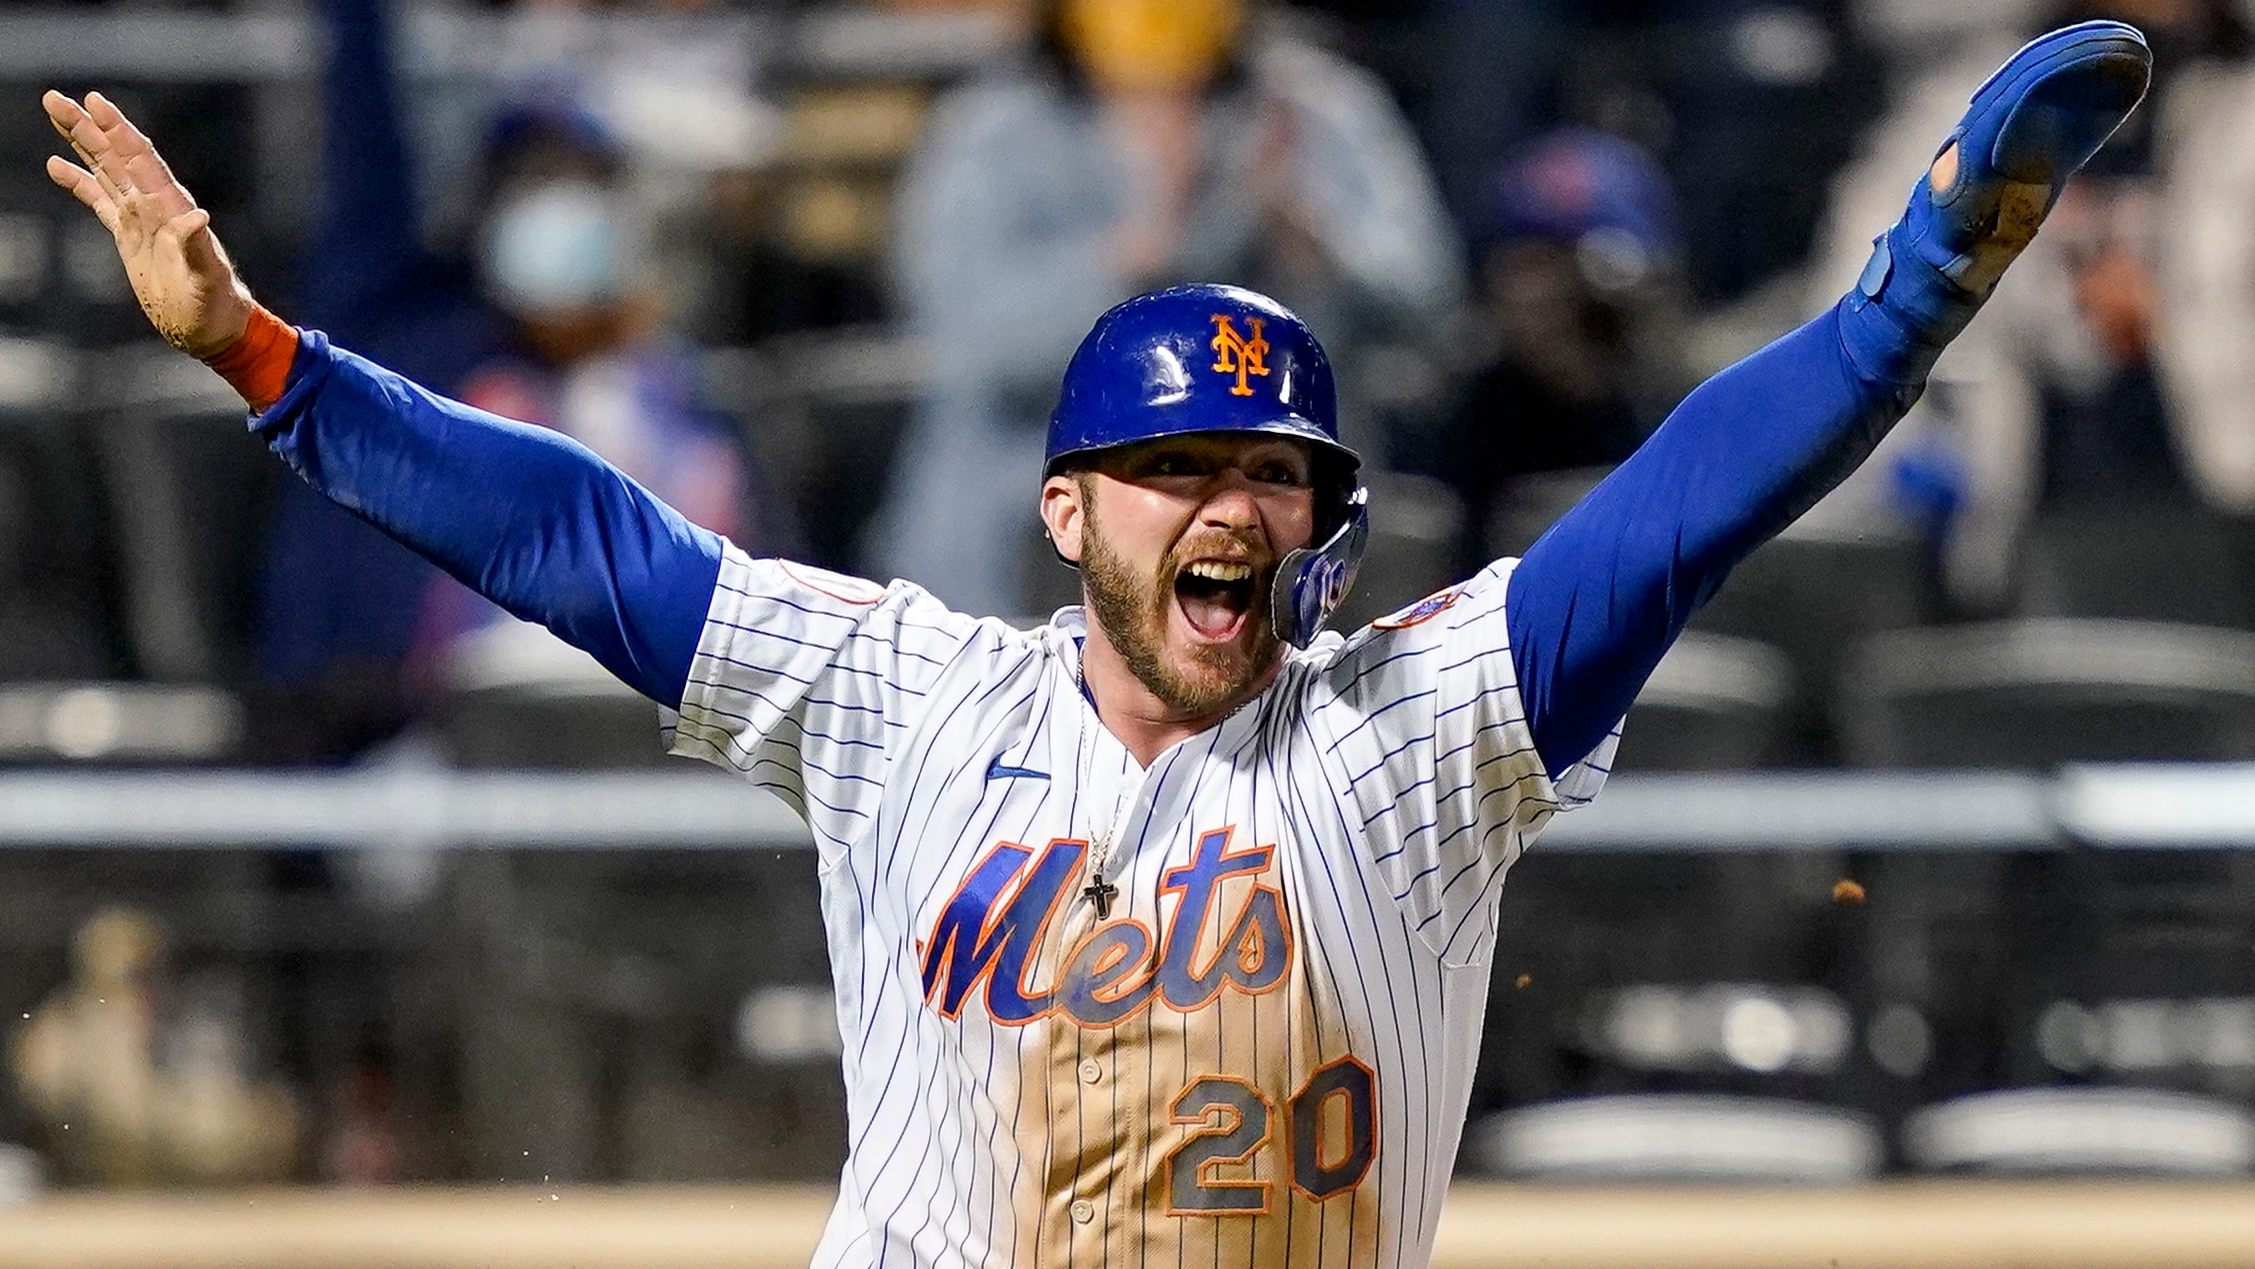 LOOK: Mets' Pete Alonso arrives to Opening Day in 'eye-popping' fit